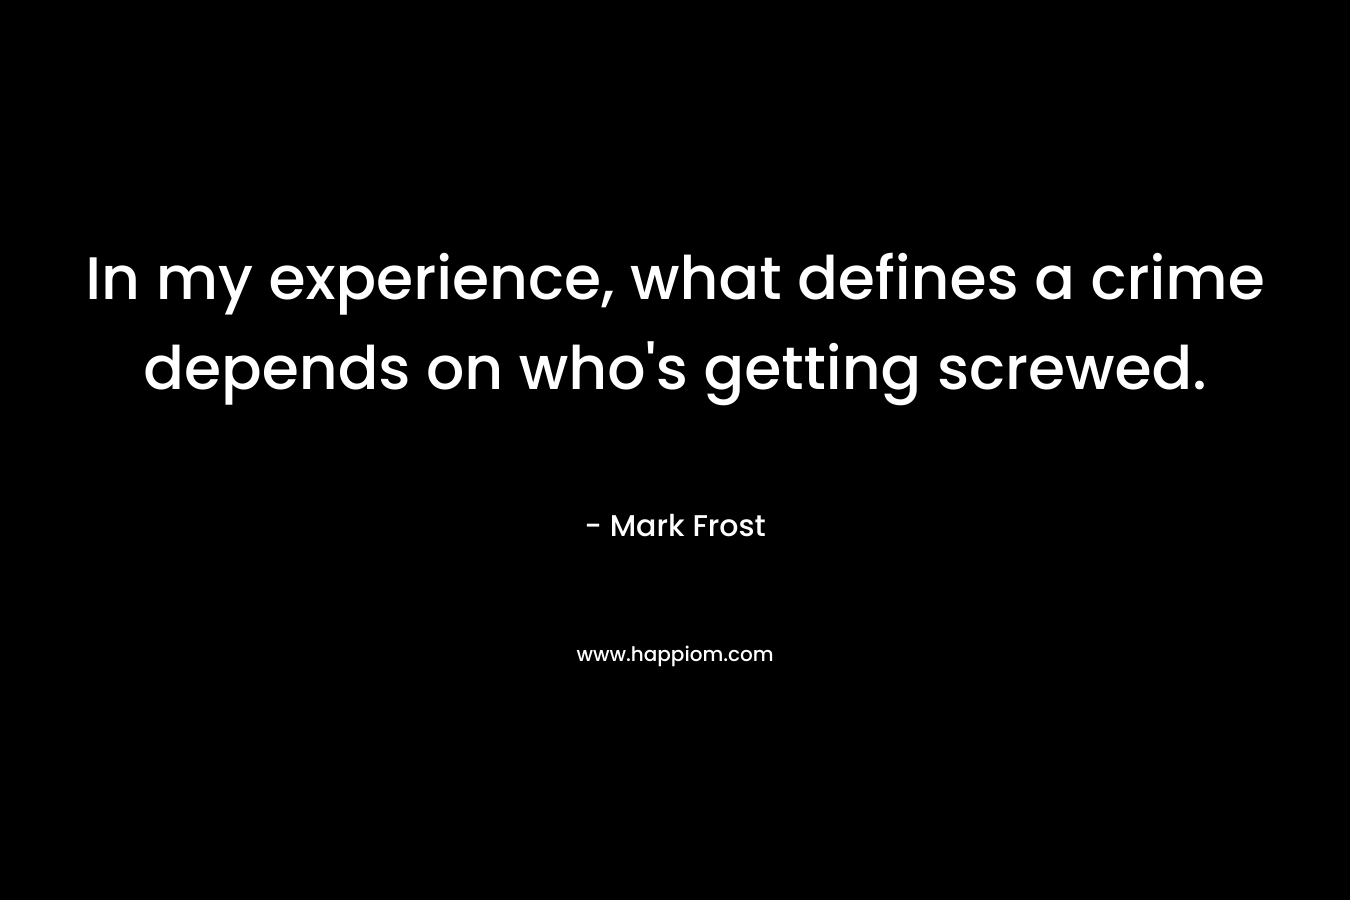 In my experience, what defines a crime depends on who’s getting screwed. – Mark Frost